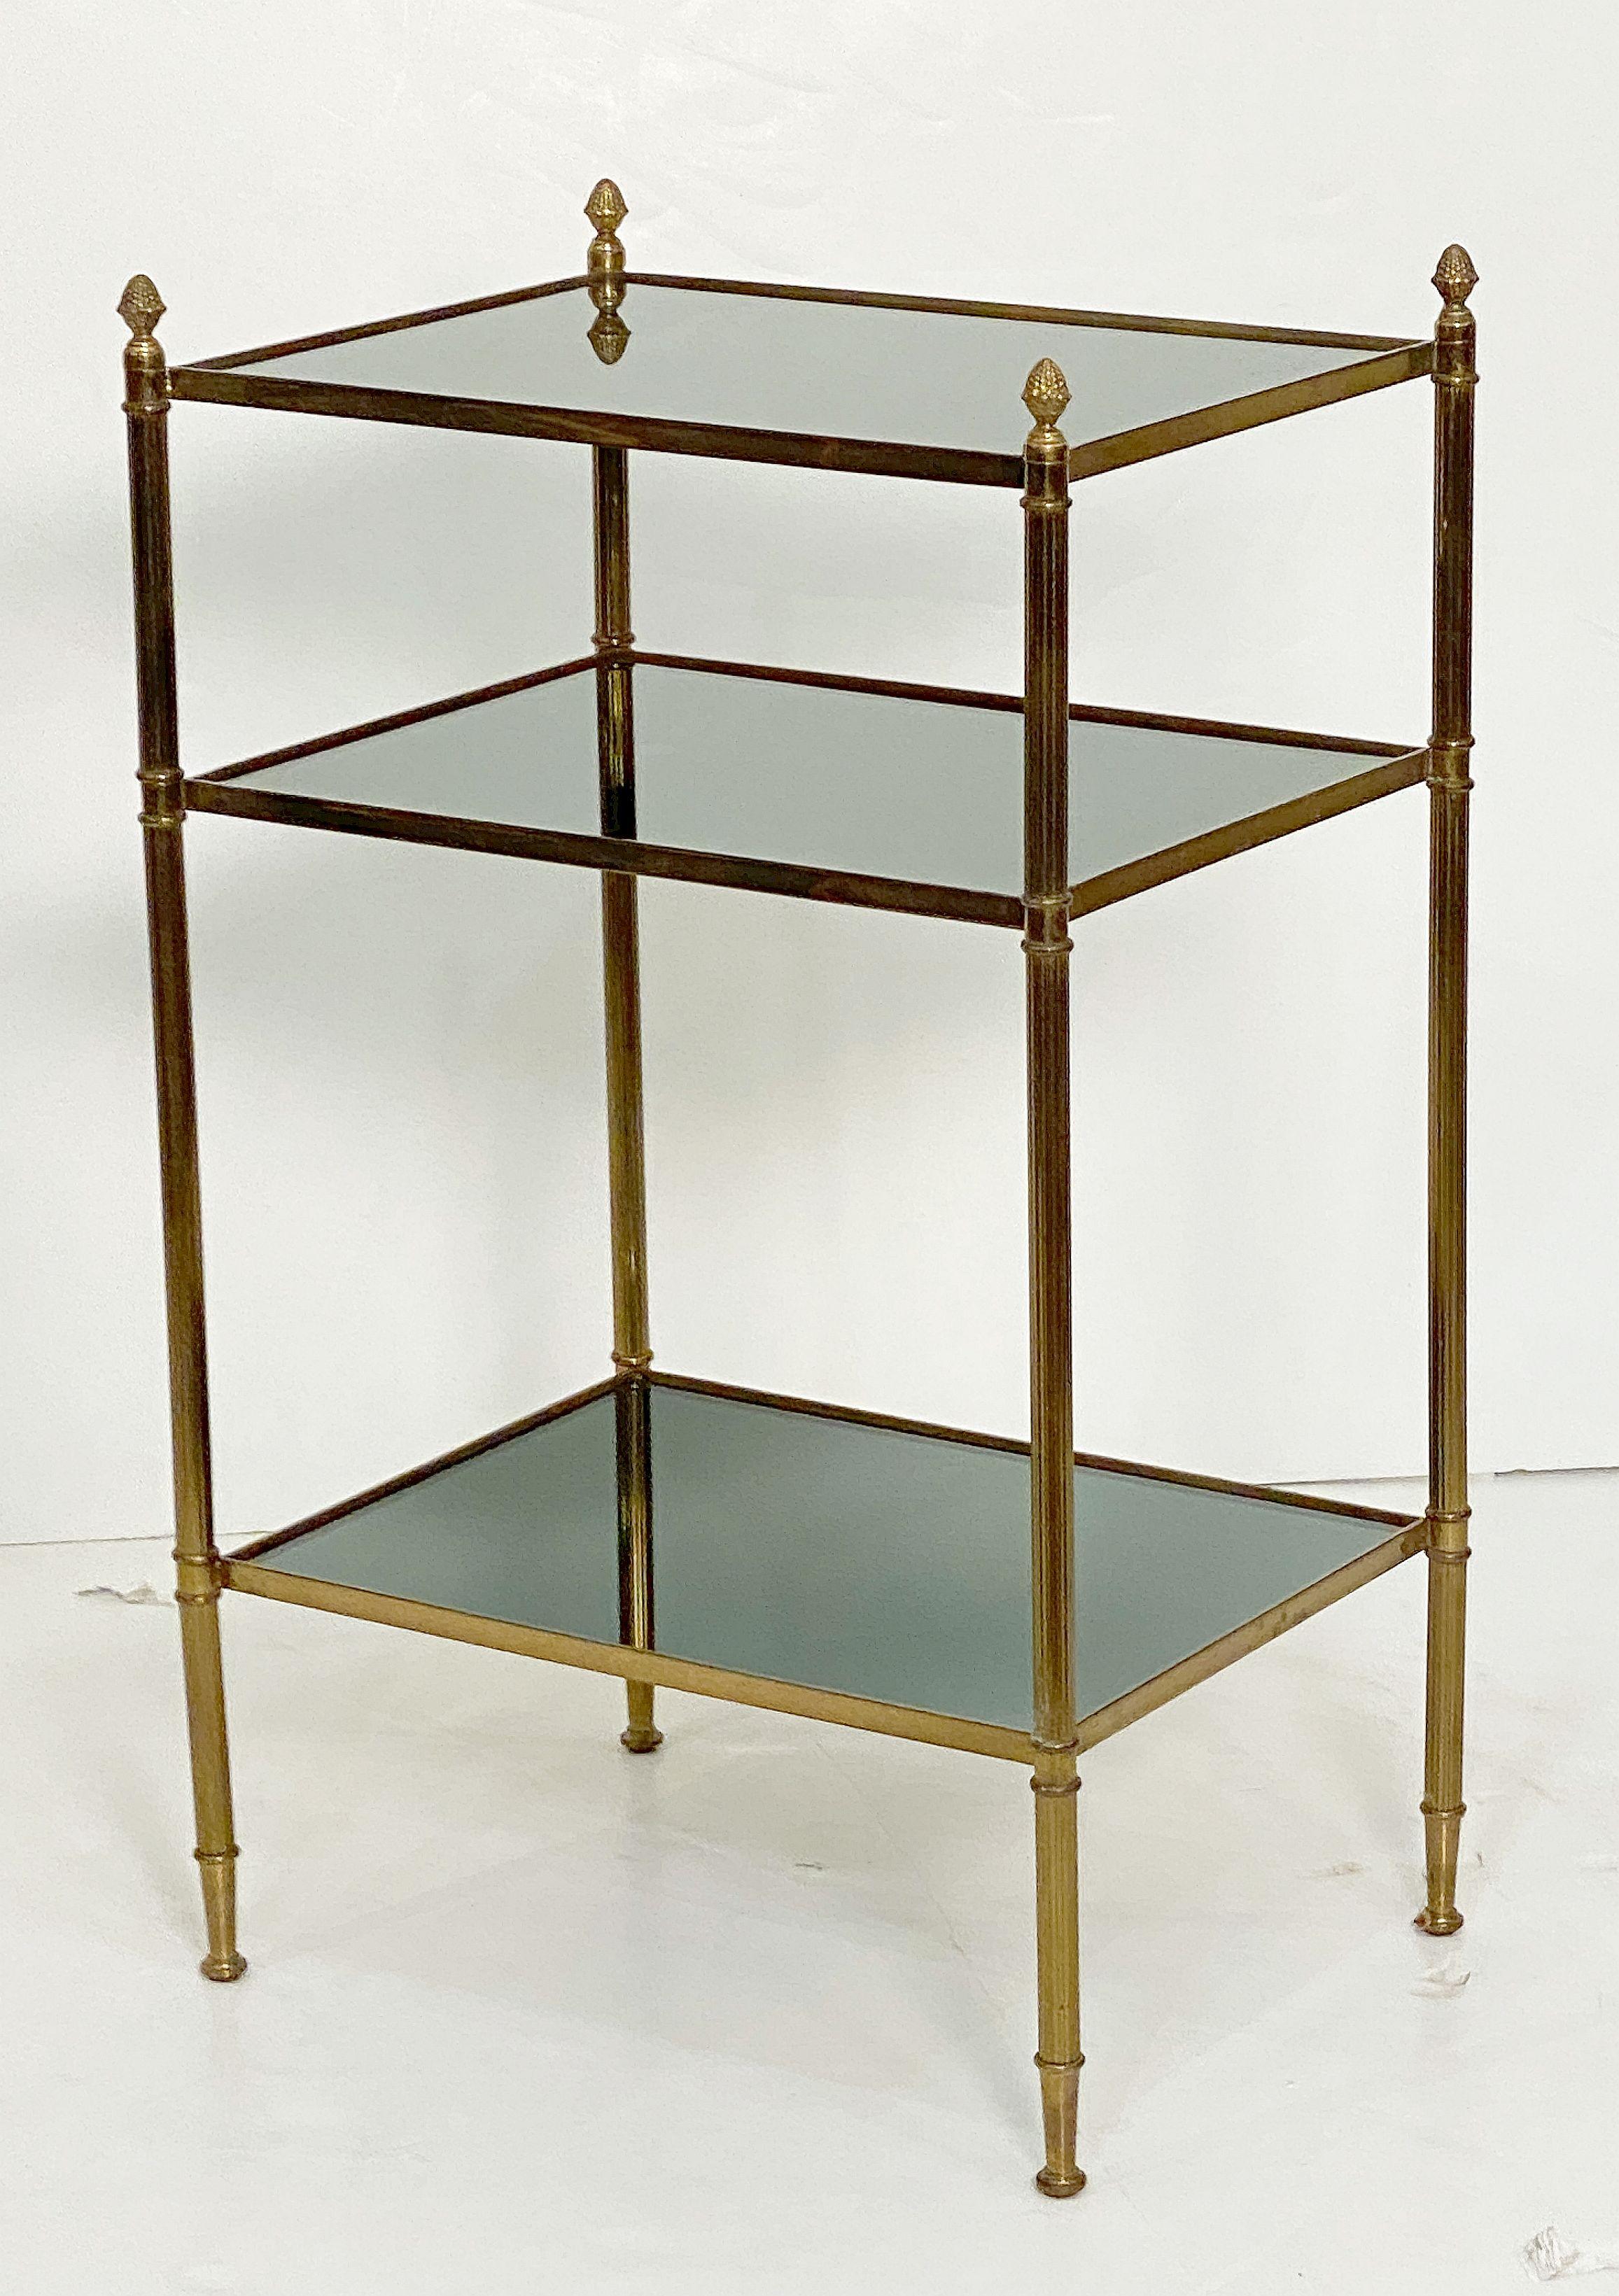 A fine French Mid-Century Modern rectangular side or end table, featuring three tiers of tinted mirrored glass and a stretcher frame of brass with tapering legs and finials.